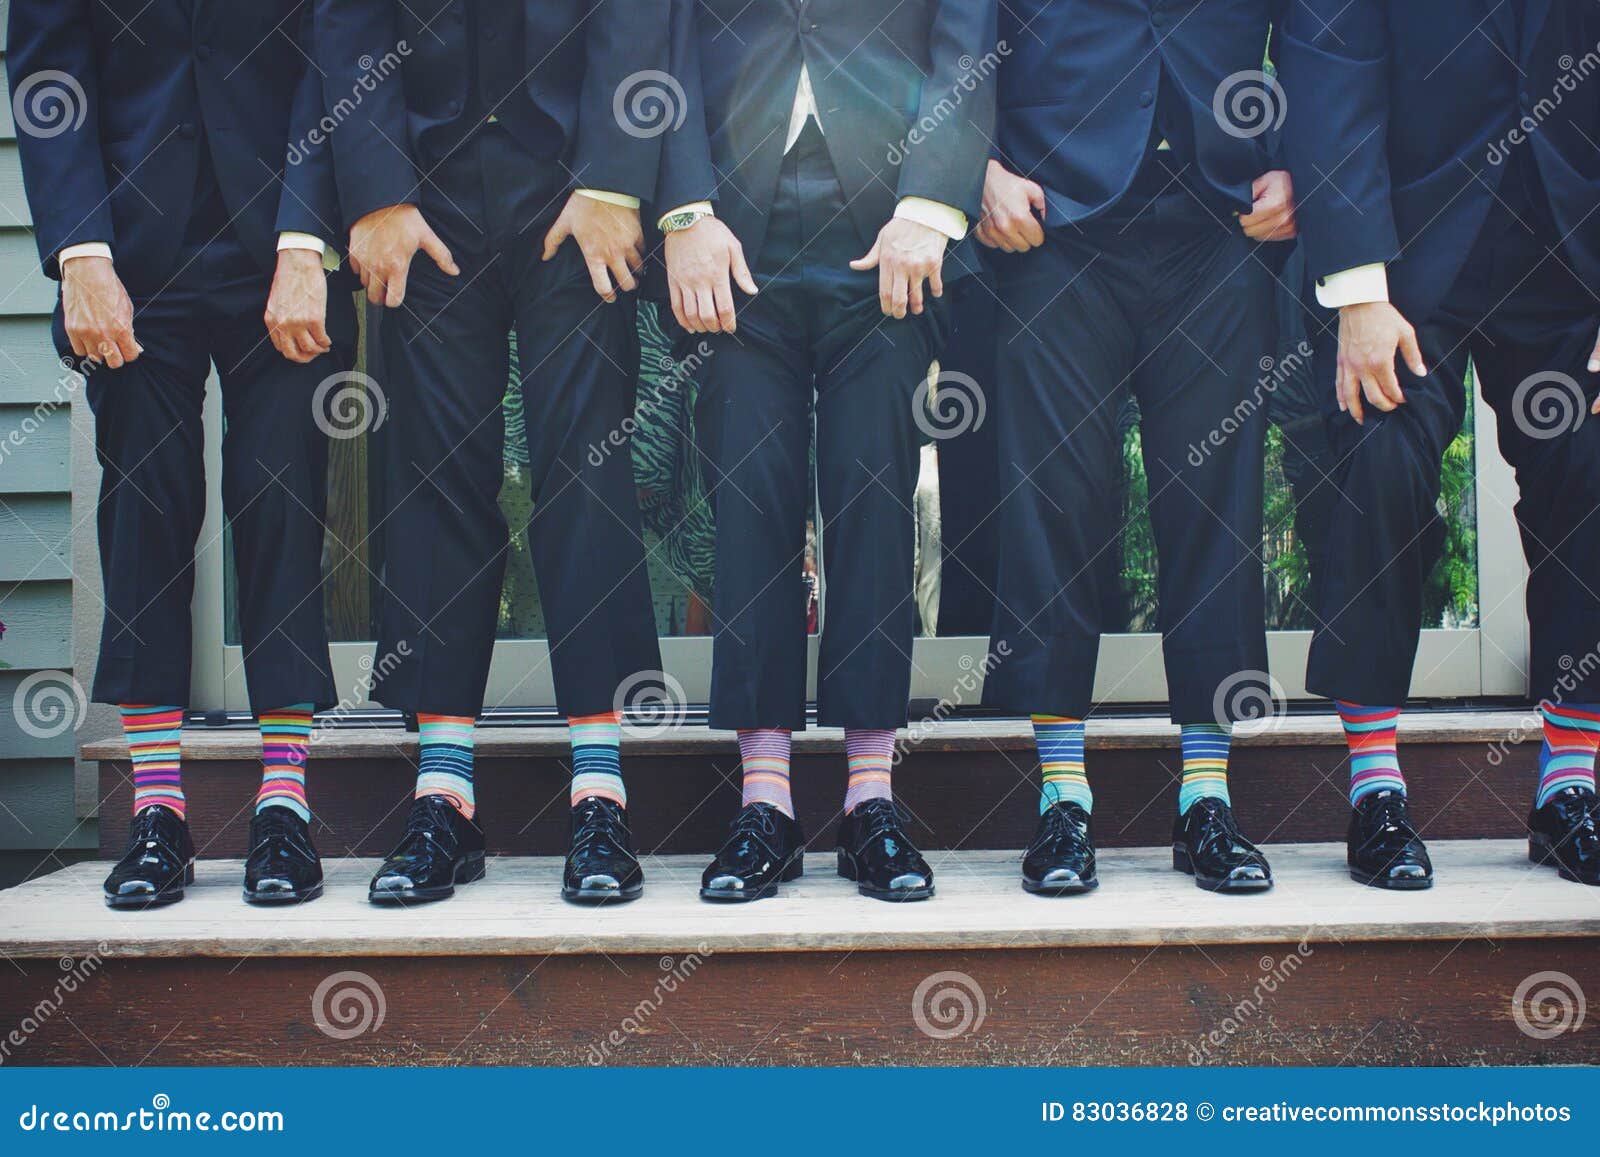 Businessmen With Colorful Socks Picture. Image: 83036828